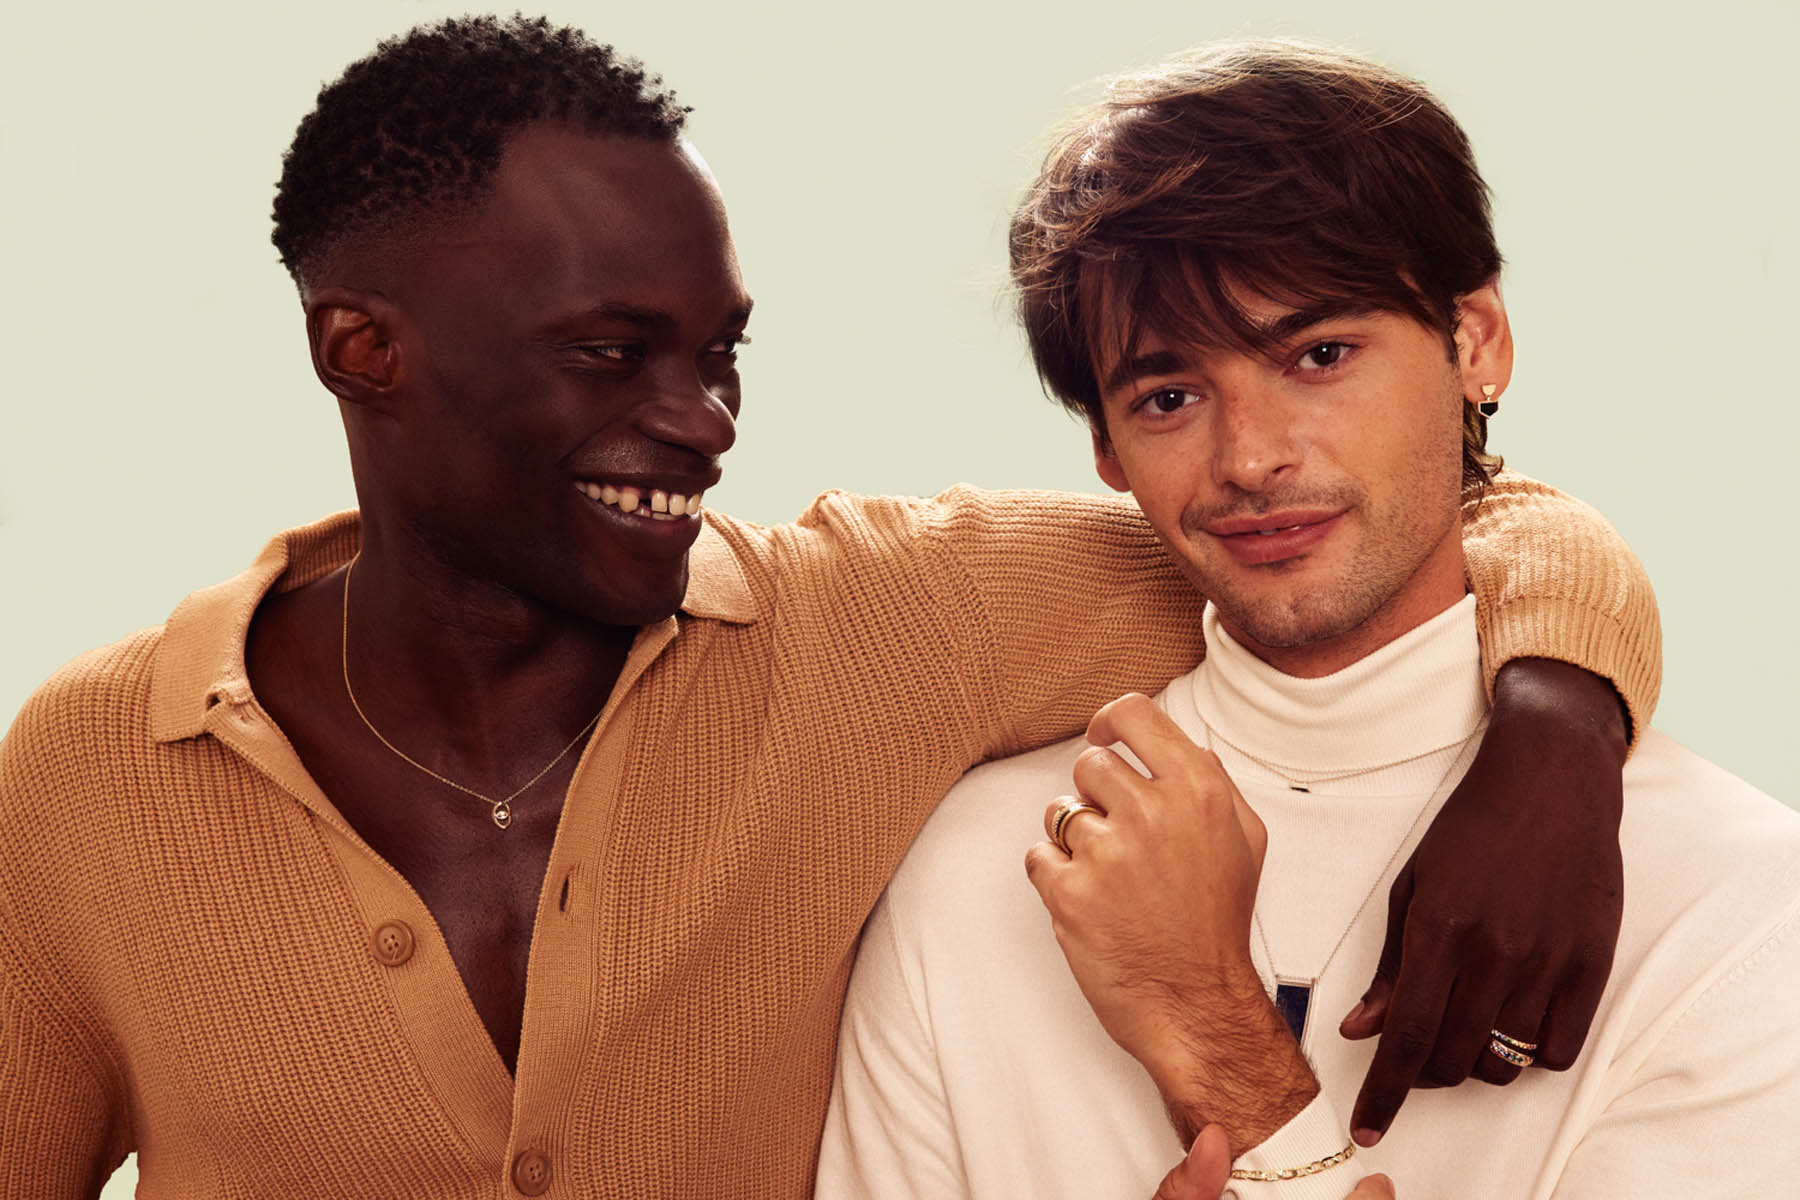 Two people model Bario Neal jewelry. The one on the left is wearing a necklace,a dn the one on the right is showing off a ring.